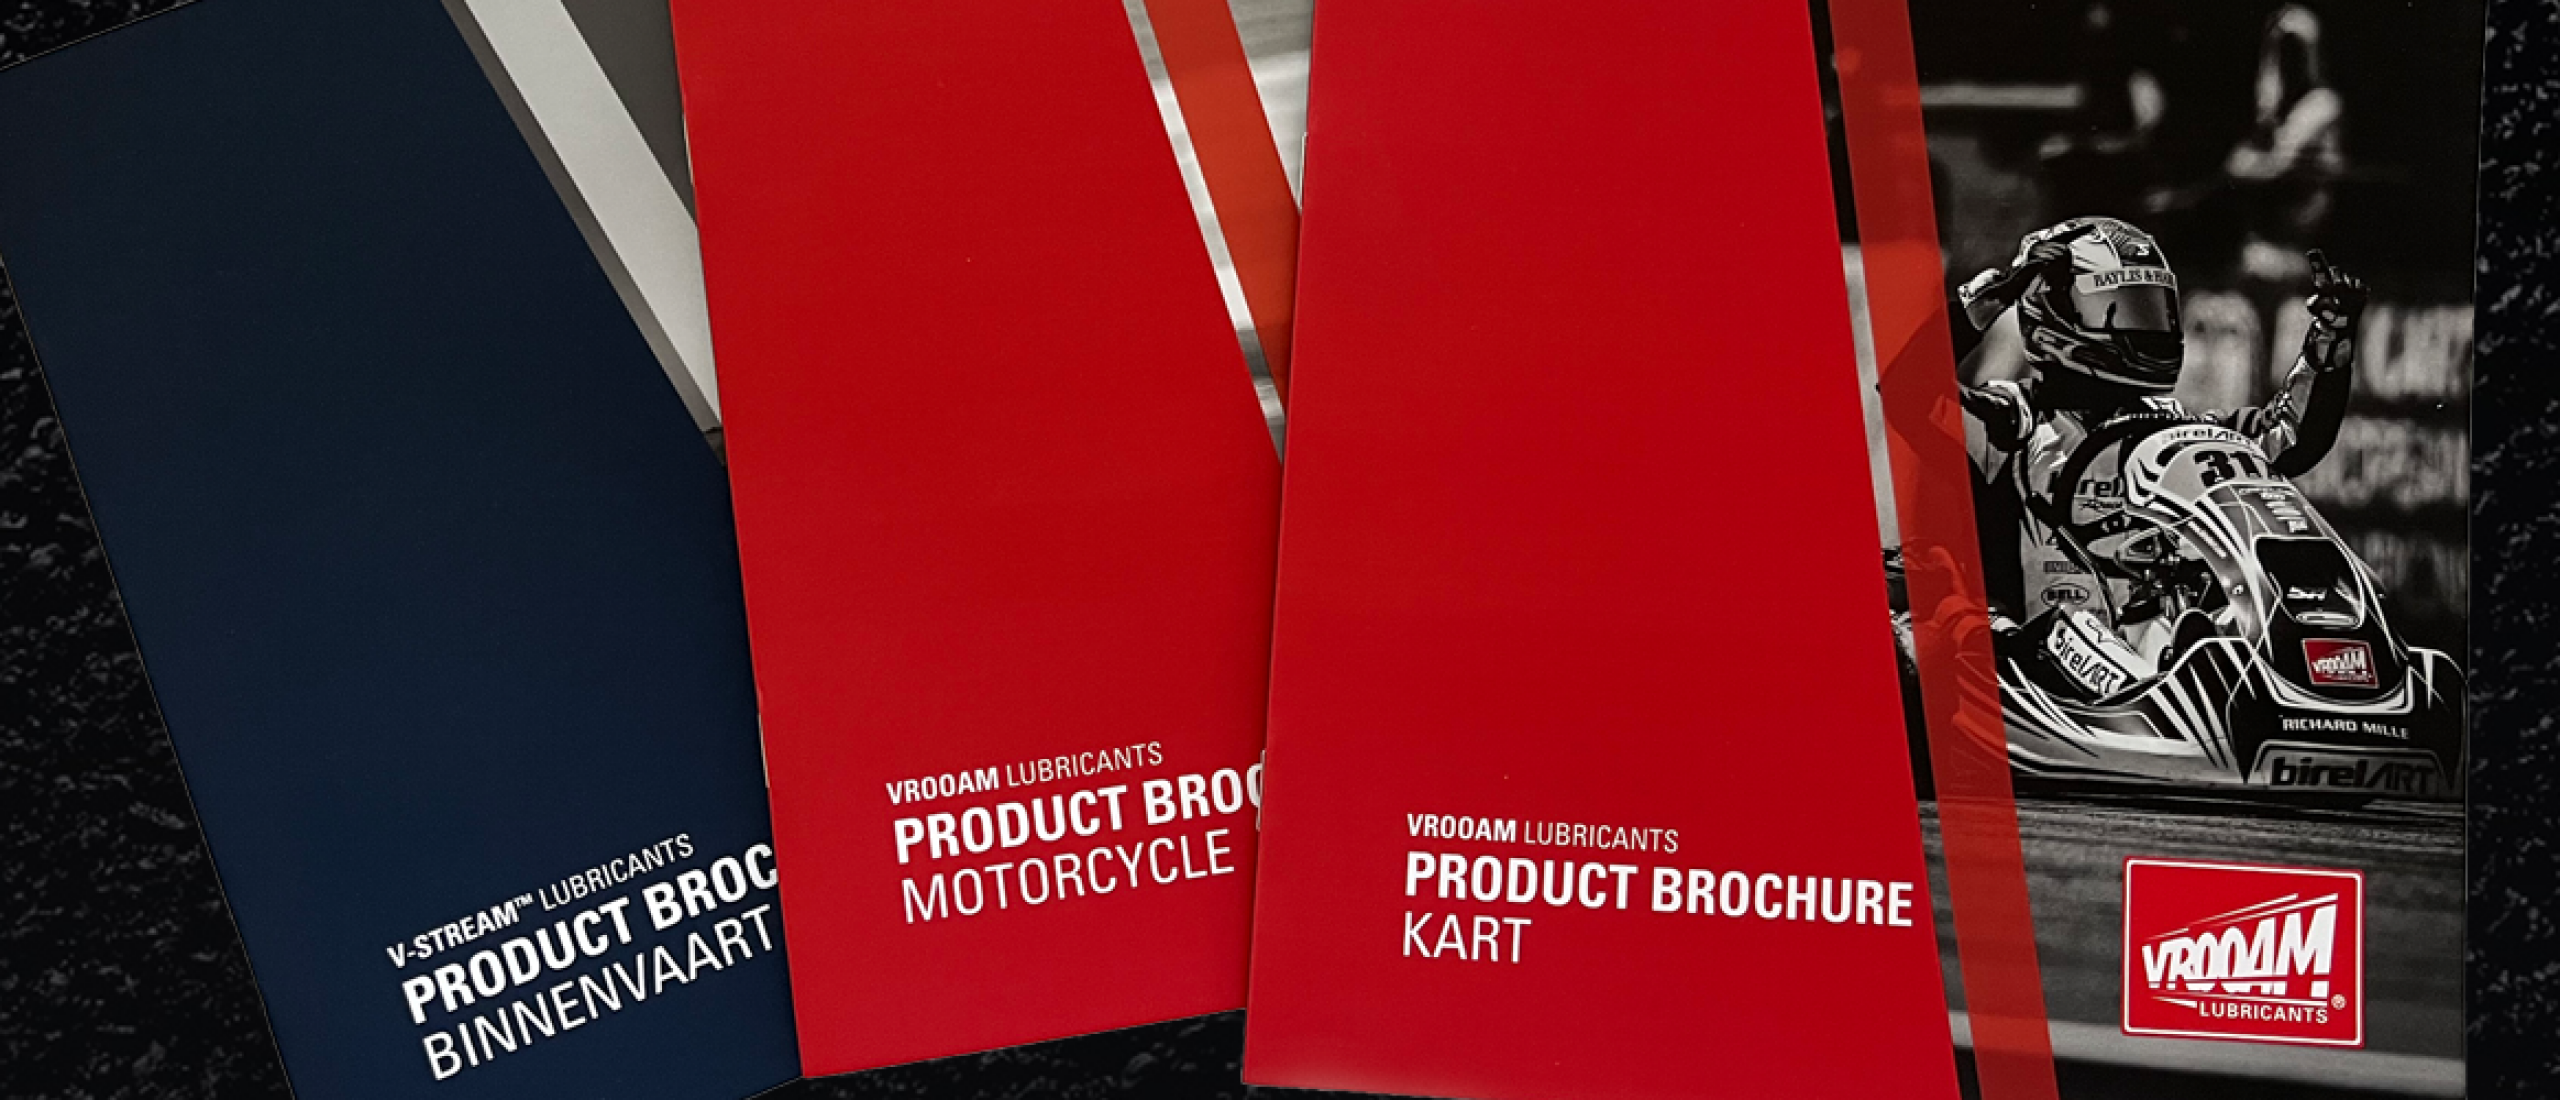 New Feature: Online Product Brochures!